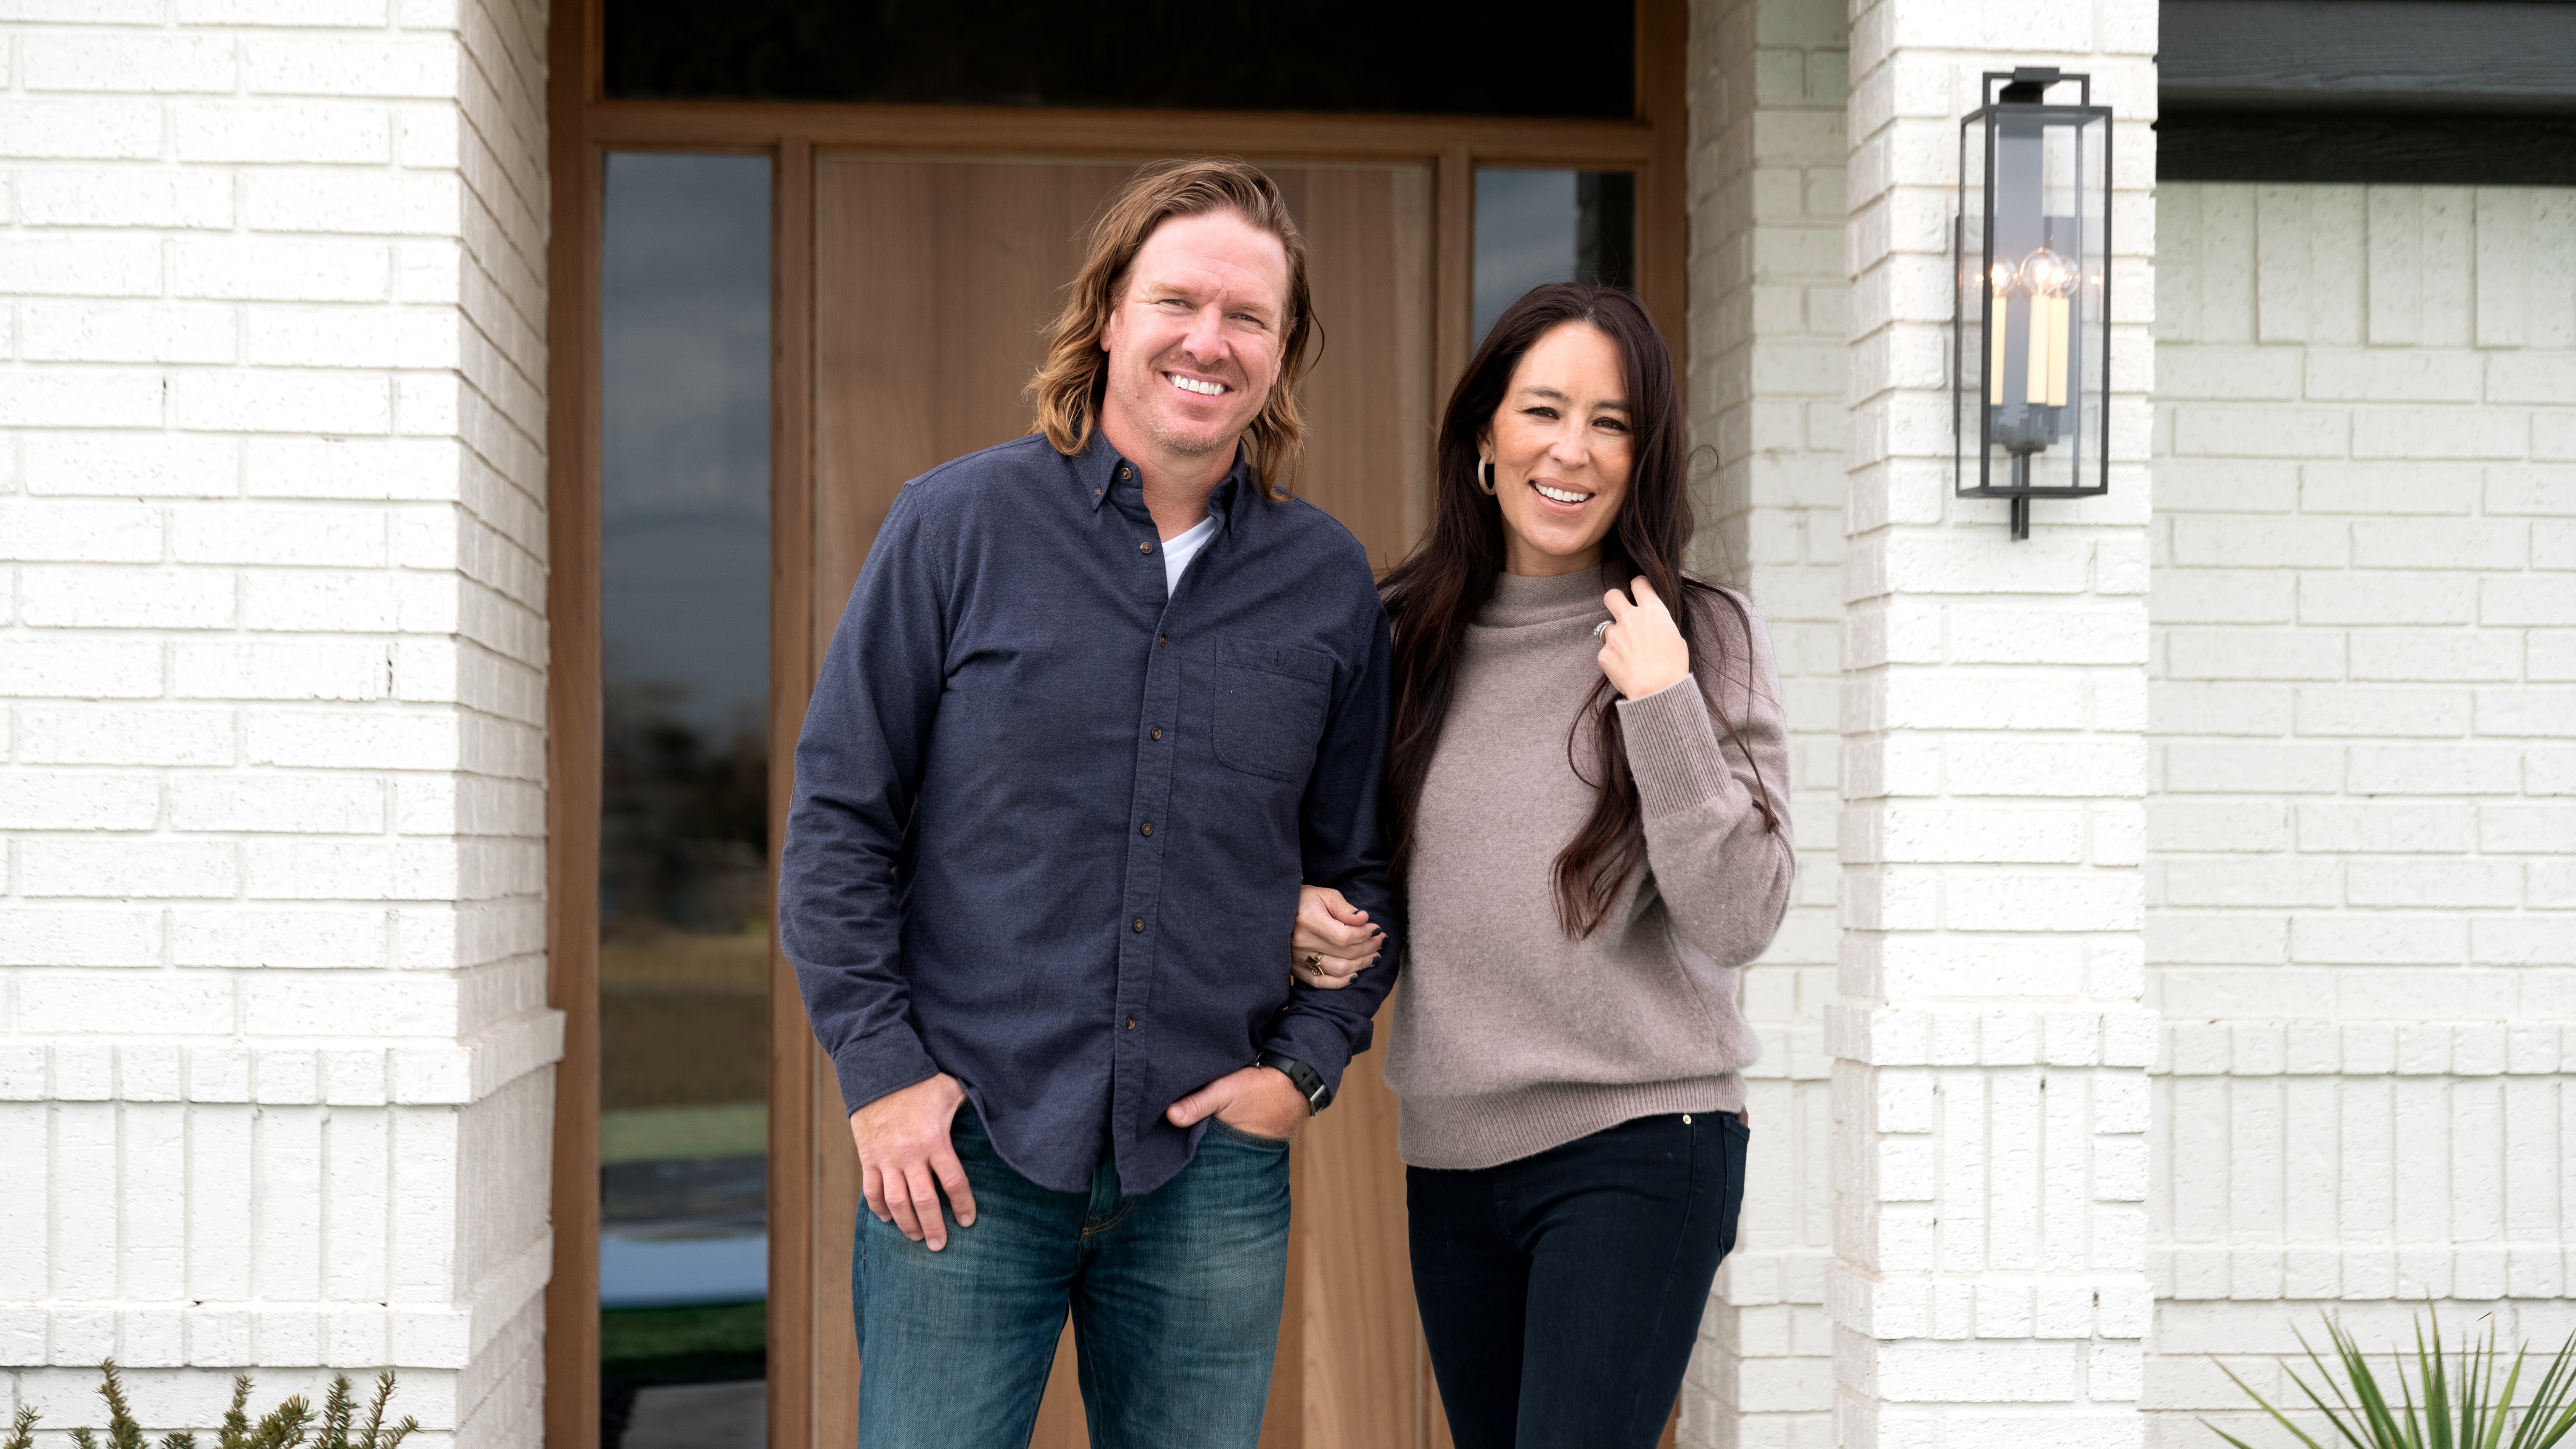 Chip and Joanna Gaines return to their roots with ‘Fixer Upper: Welcome Home’